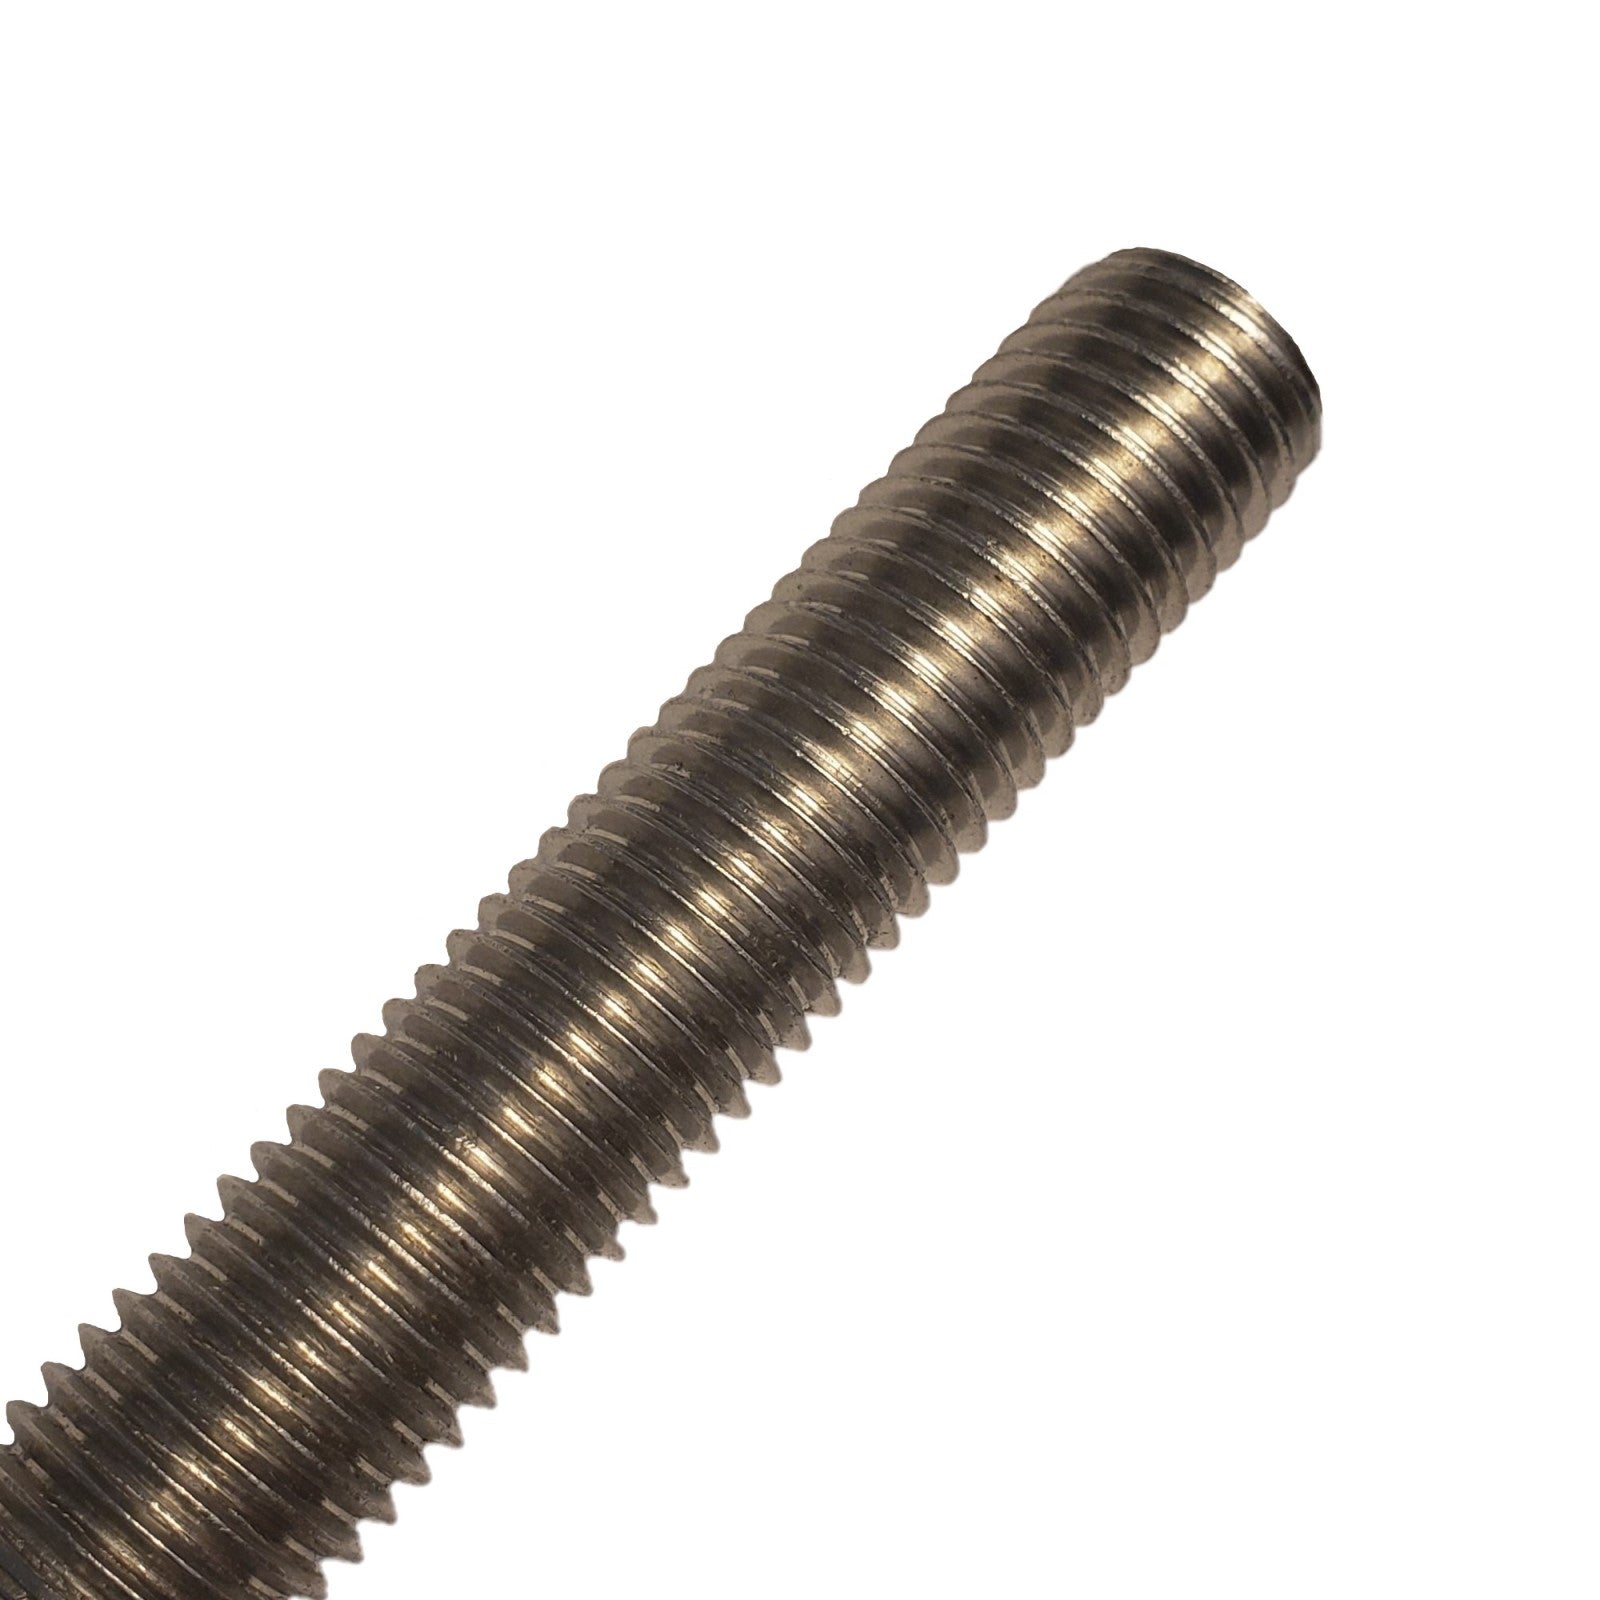 34 inch10 x 18 inch 316 Stainless Steel Threaded Rod